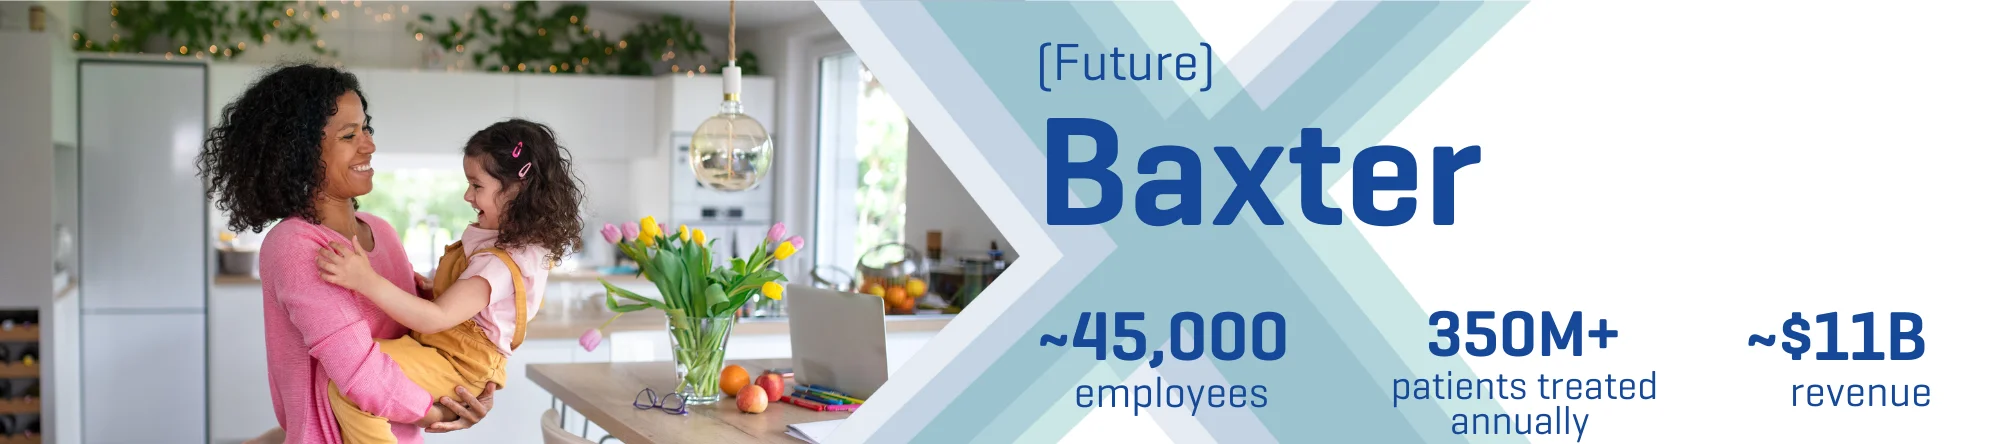 Future Baxter which will have approximately 45,000 employees, treat 350+ million patients and have approximately 11 billion in revenue